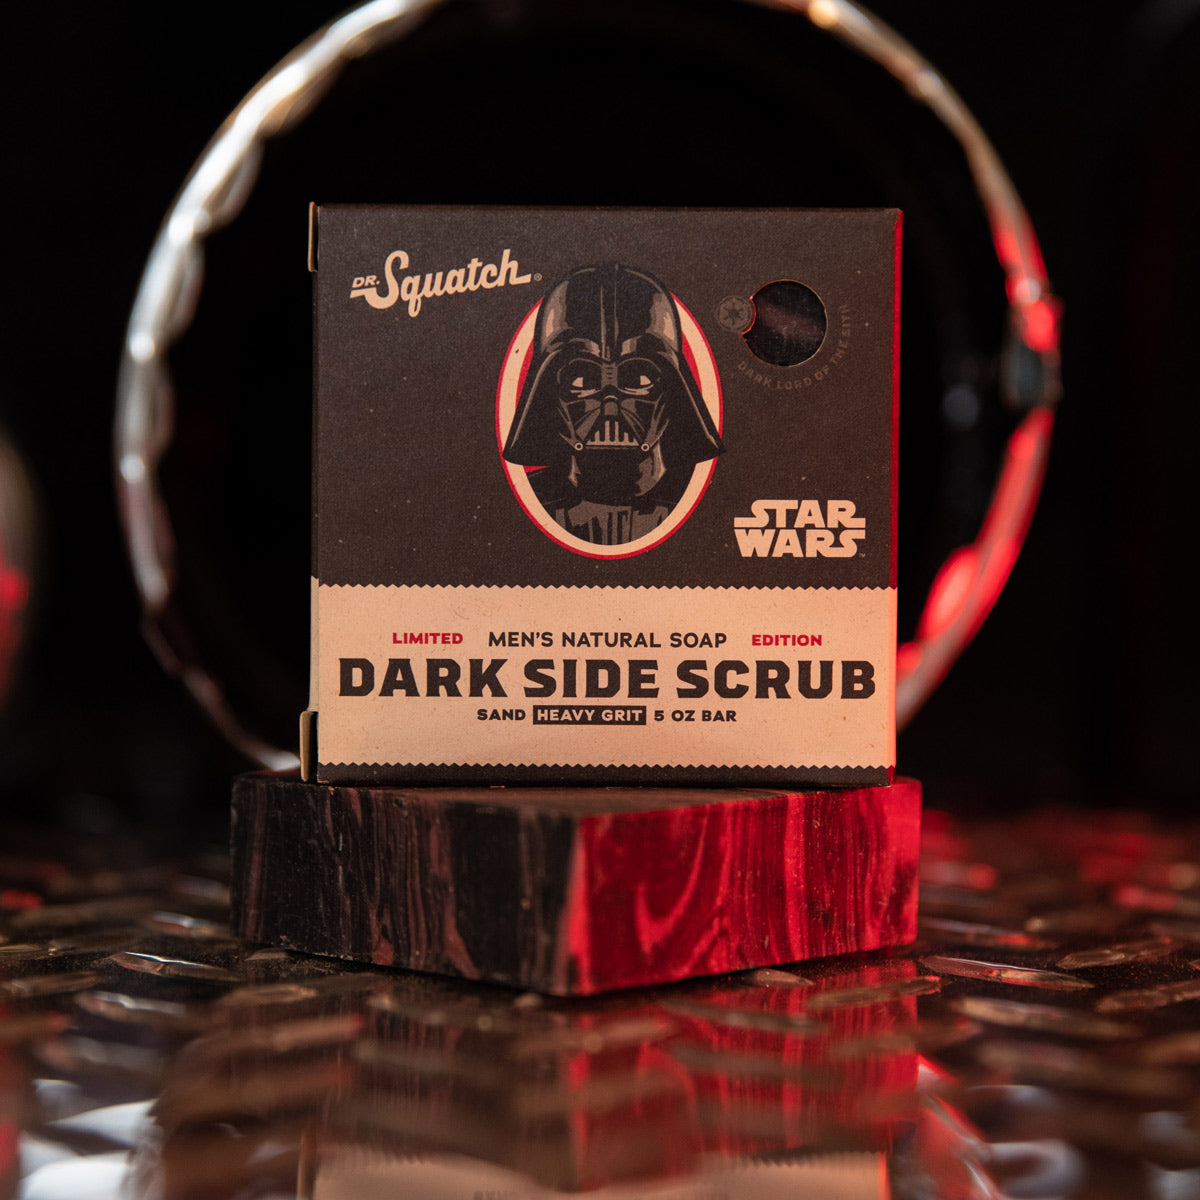 Choose Your Destiny” with Star Wars Themed Soap from Dr. Squatch – Star Wars  Reporter